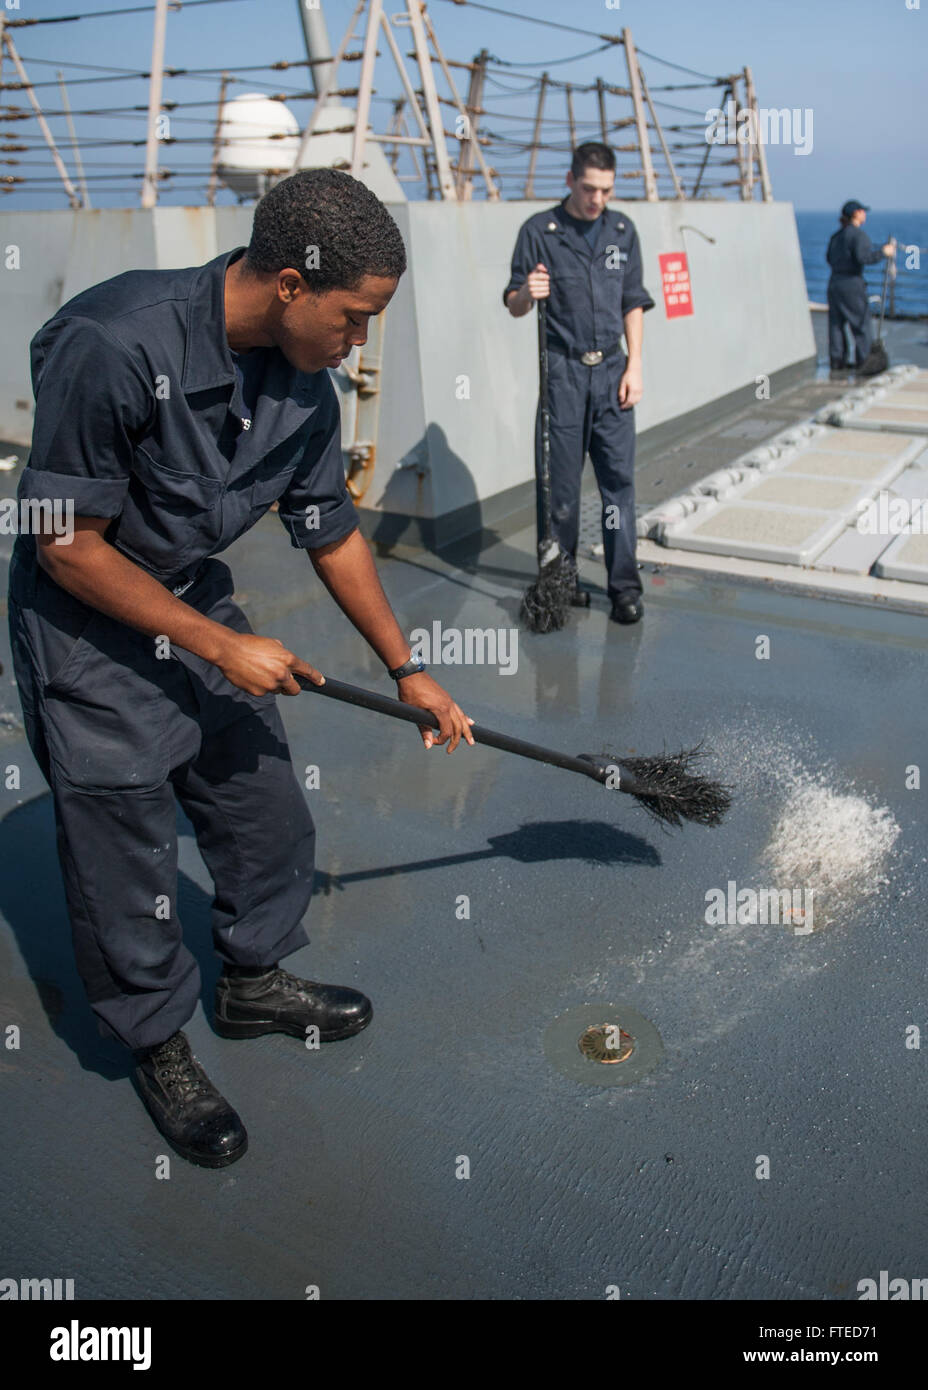 140408-N-EI510-061 MEDITERRANEAN SEA (April 08, 2014) - Sonar Technician (Surface) Seaman Apprentice Gregory Harris, from Lancaster, Texas, participates in a fresh water wash down aboard the Arleigh Burke-class guided-missile destroyer USS Truxtun (DDG 103). Truxtun is deployed as part of the George H.W. Bush Carrier Strike Group on a scheduled deployment supporting maritime security operations and theater security cooperation efforts in the U.S. 5th Fleet area of responsibility. (U.S. Navy photo by Mass Communication Specialist 3rd Class Scott Barnes/Released) Stock Photo